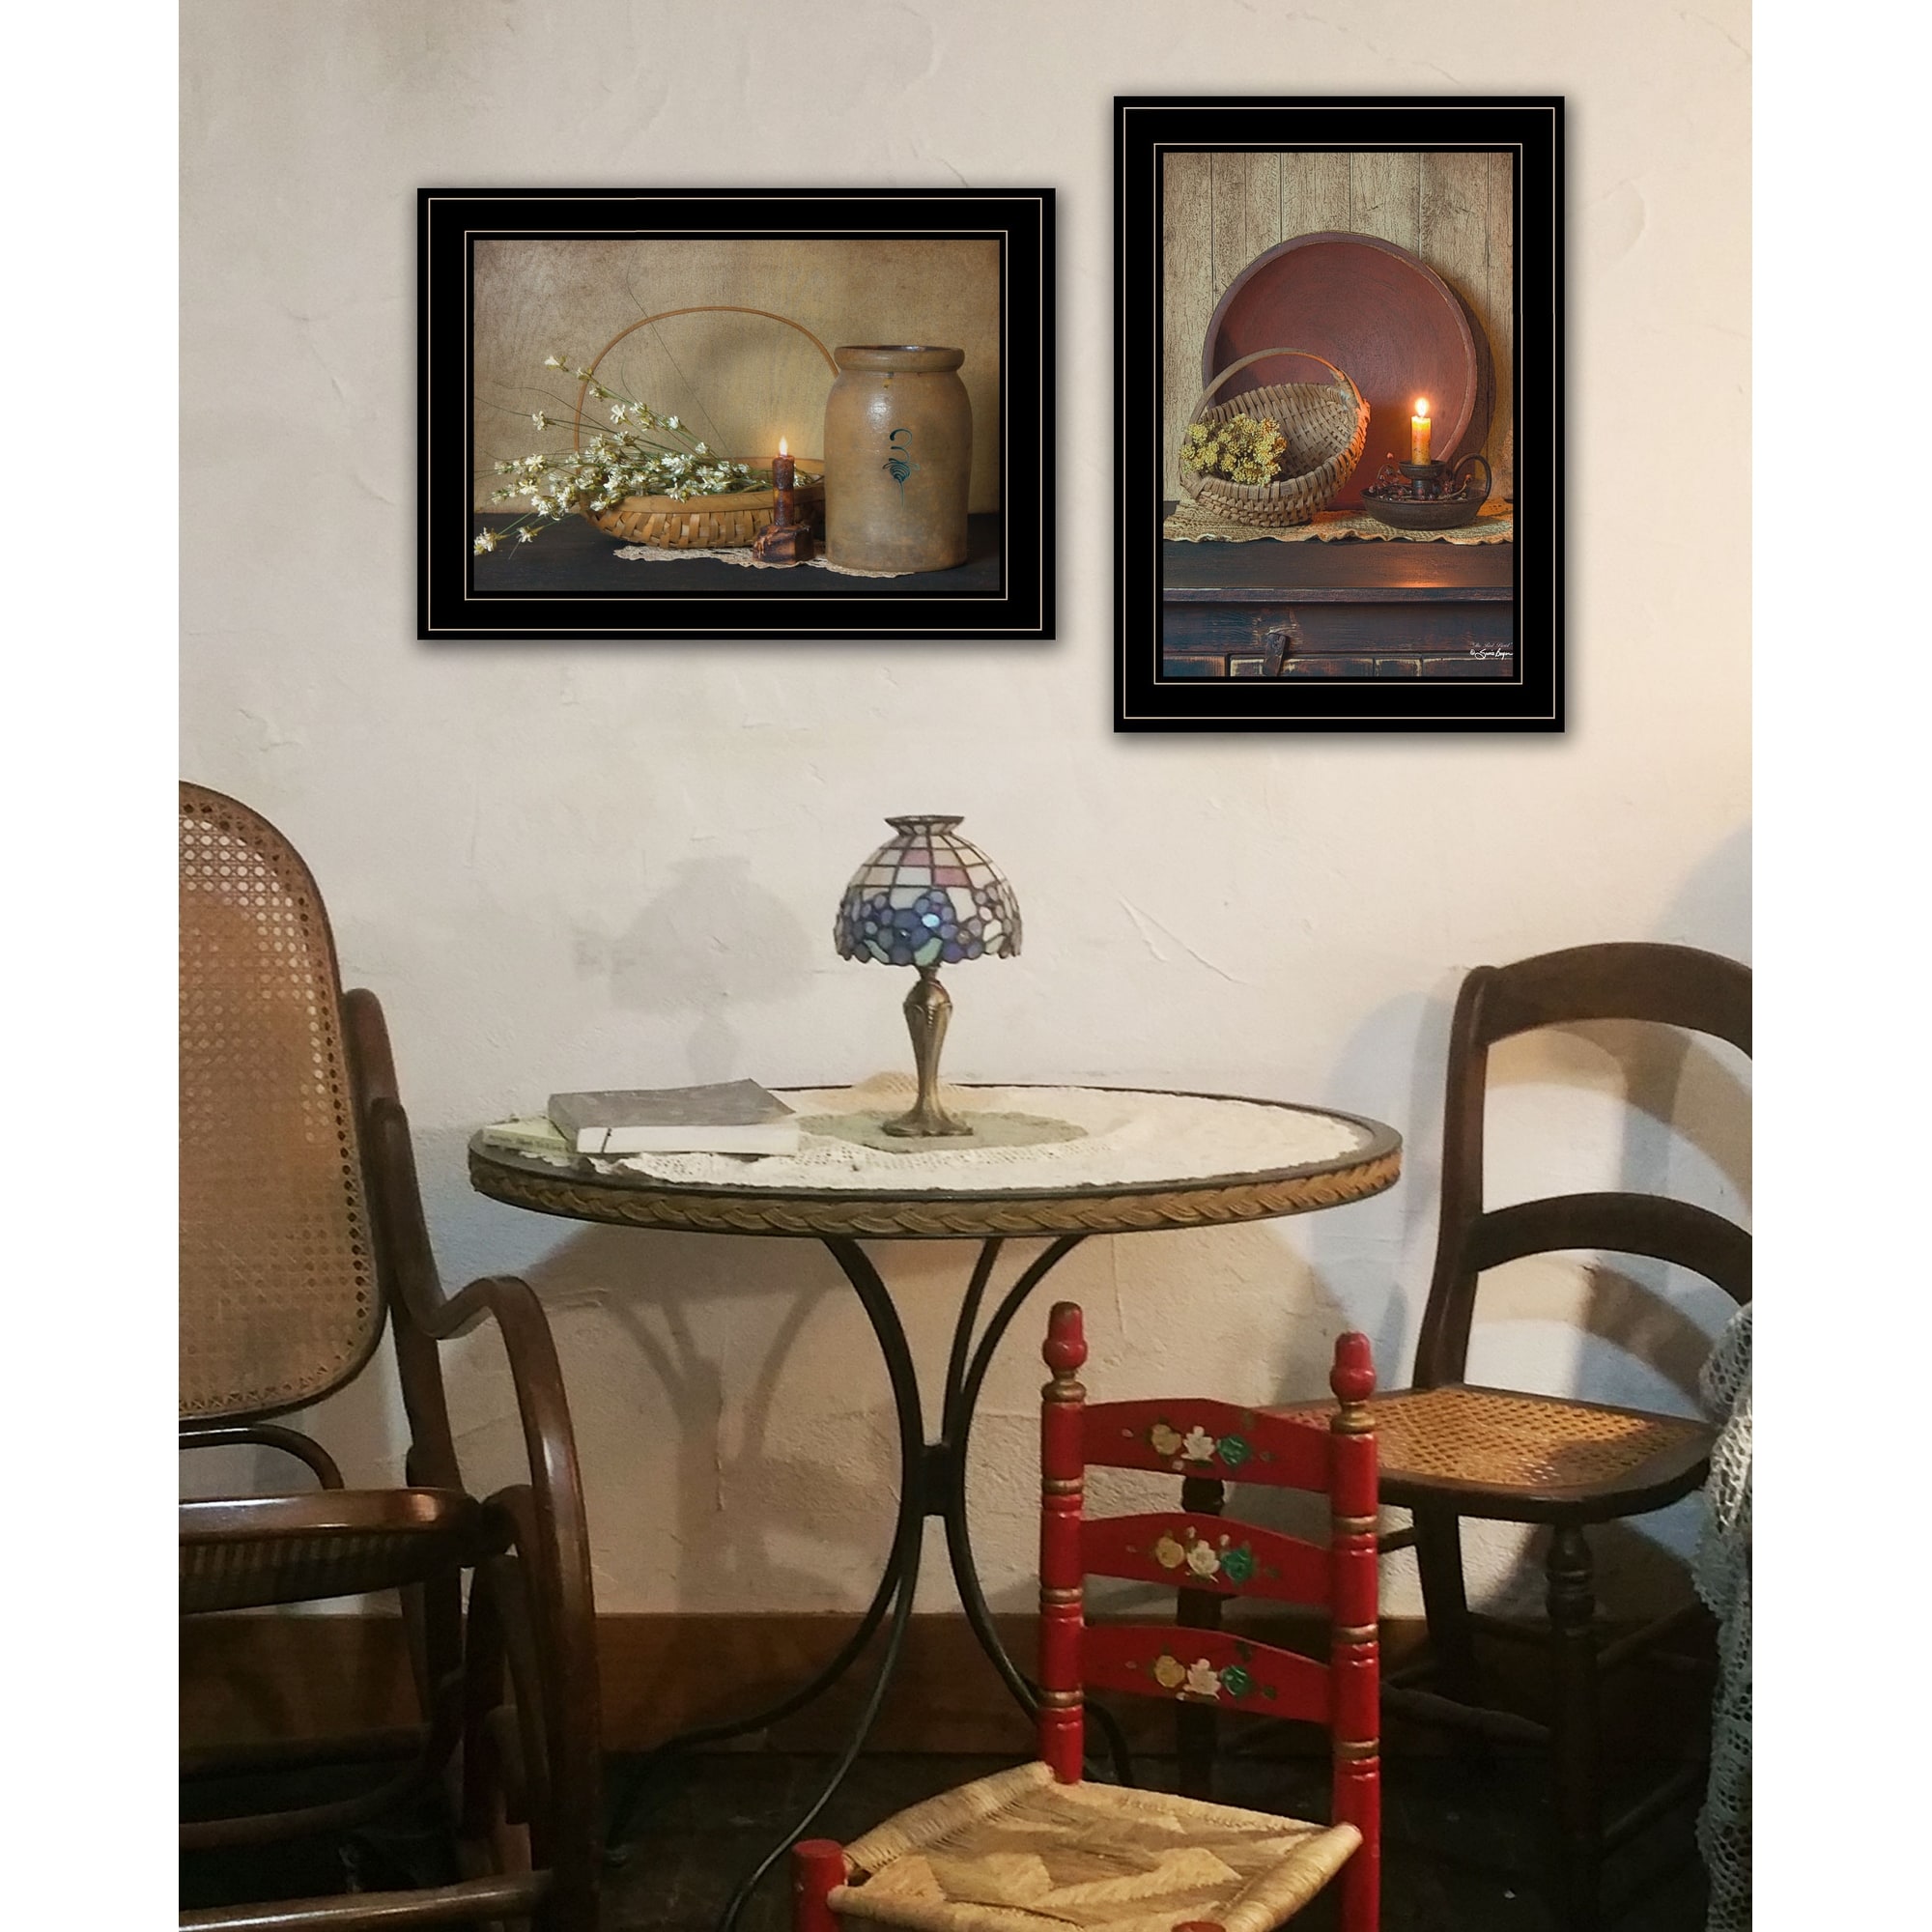 "Our Home" By Susie Boyer Hang Framed Print Black Frame